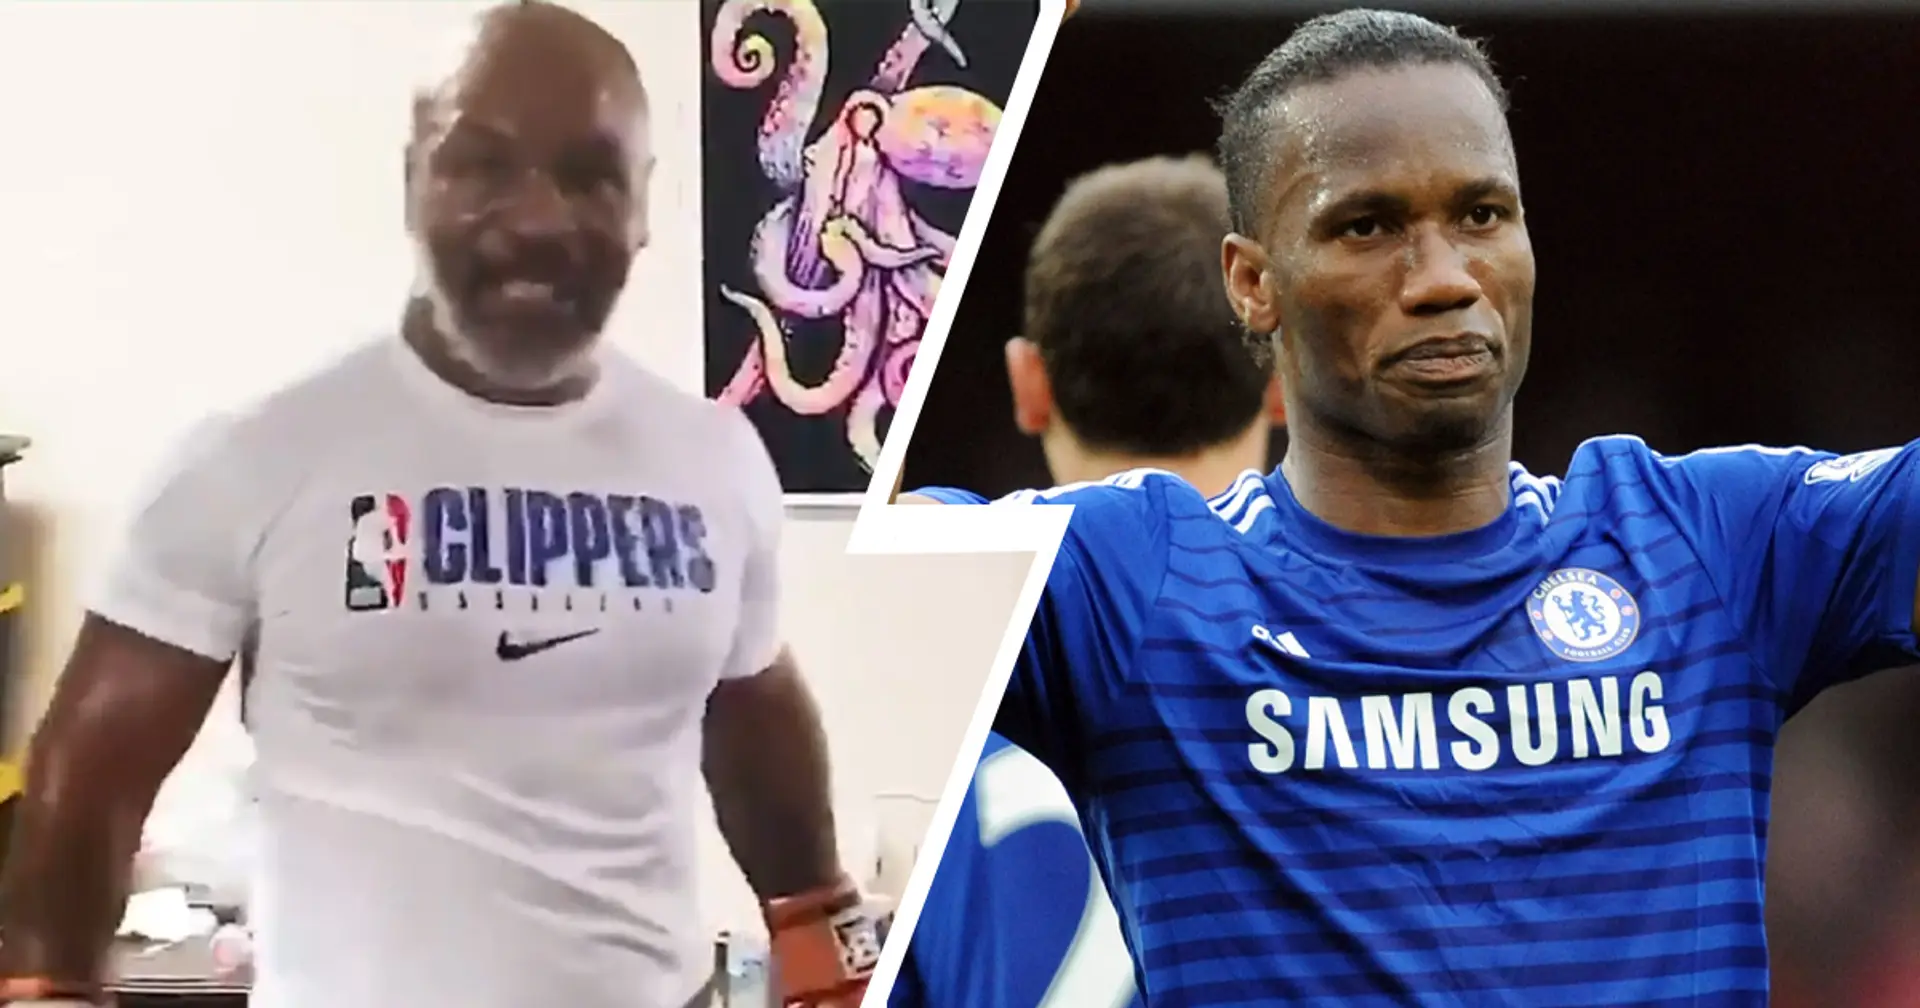 Mike Tyson says 'I'm back' — 6 Chelsea legends we want to see back from retirement now too